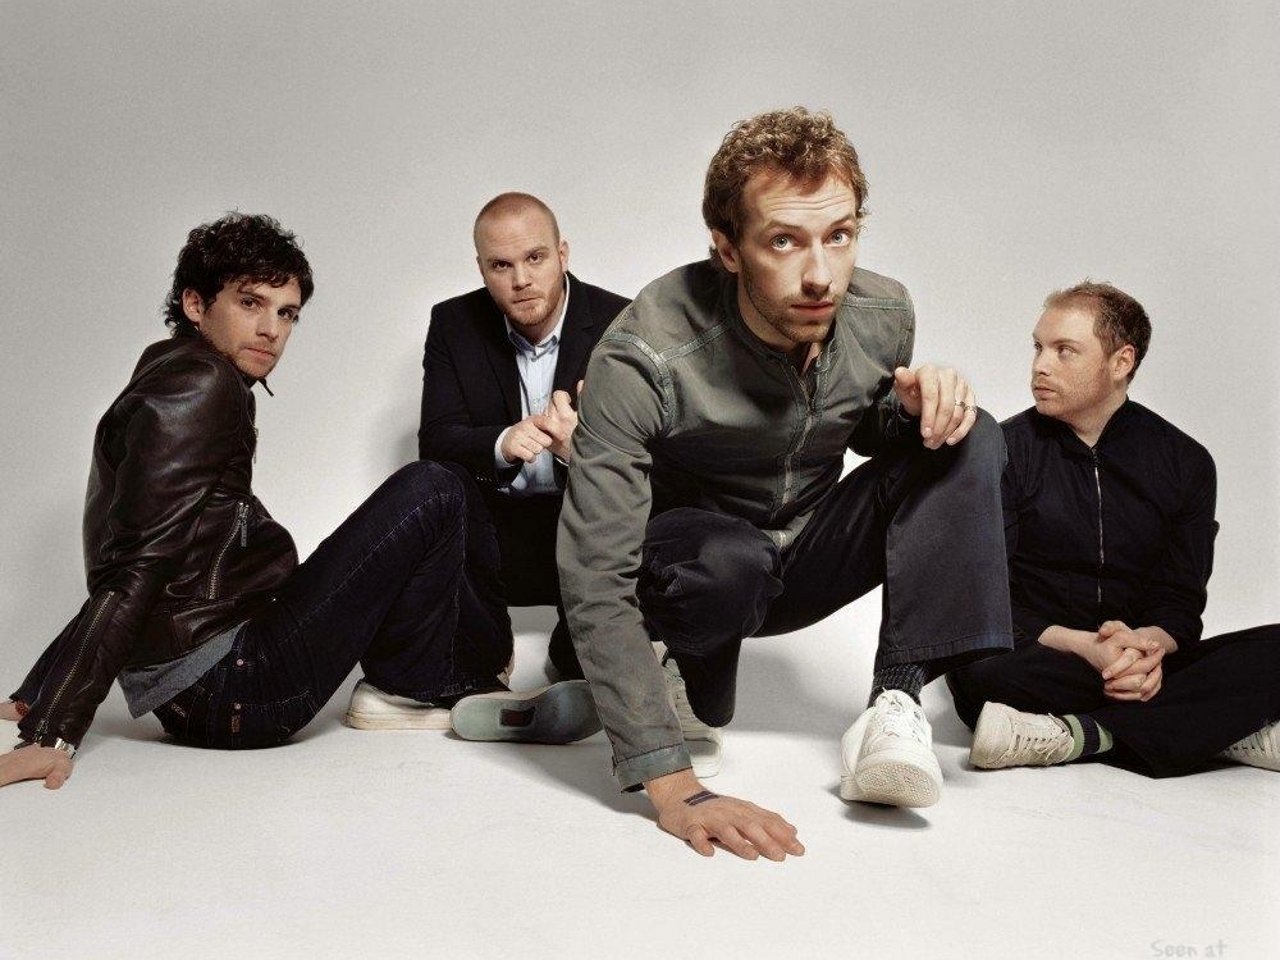 Attitude Magazine » Coldplay announce 'Ghost Stories' album, release new single